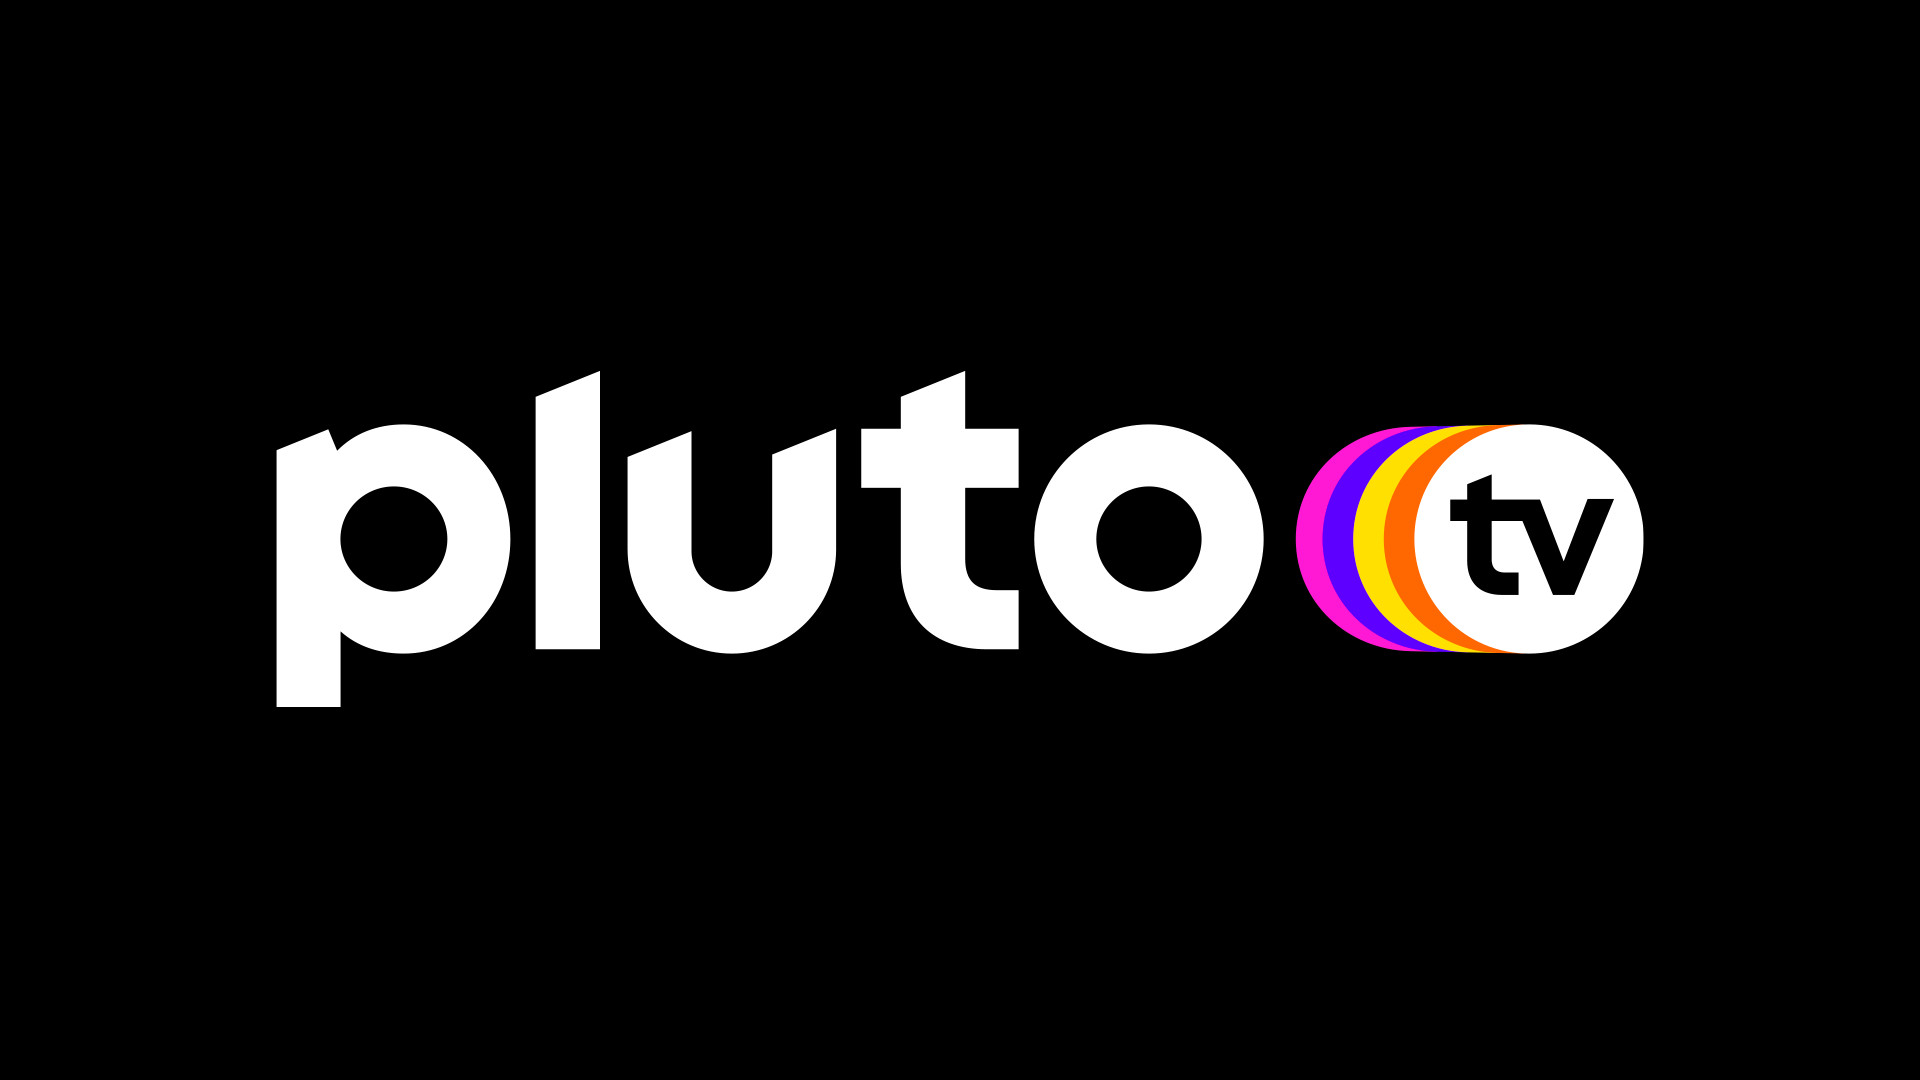 PlutoTV apps for the amazon fire stick